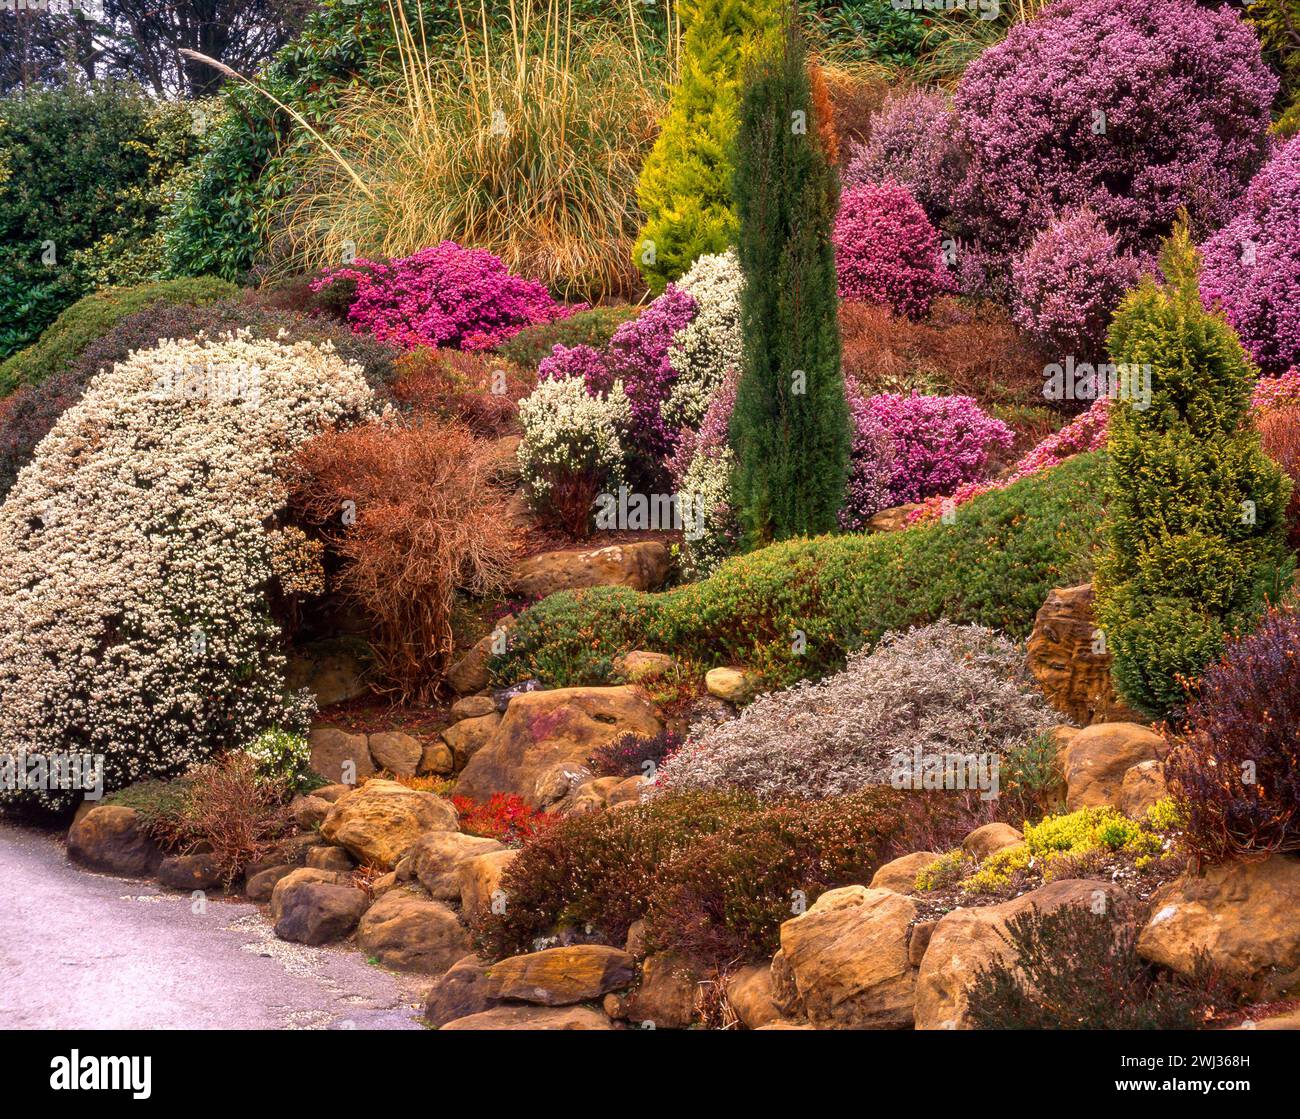 Amazing, colourful heather rock garden with conifers and grasses in Compton Acres Gardens in 1990s, Dorset, England, UK Stock Photo